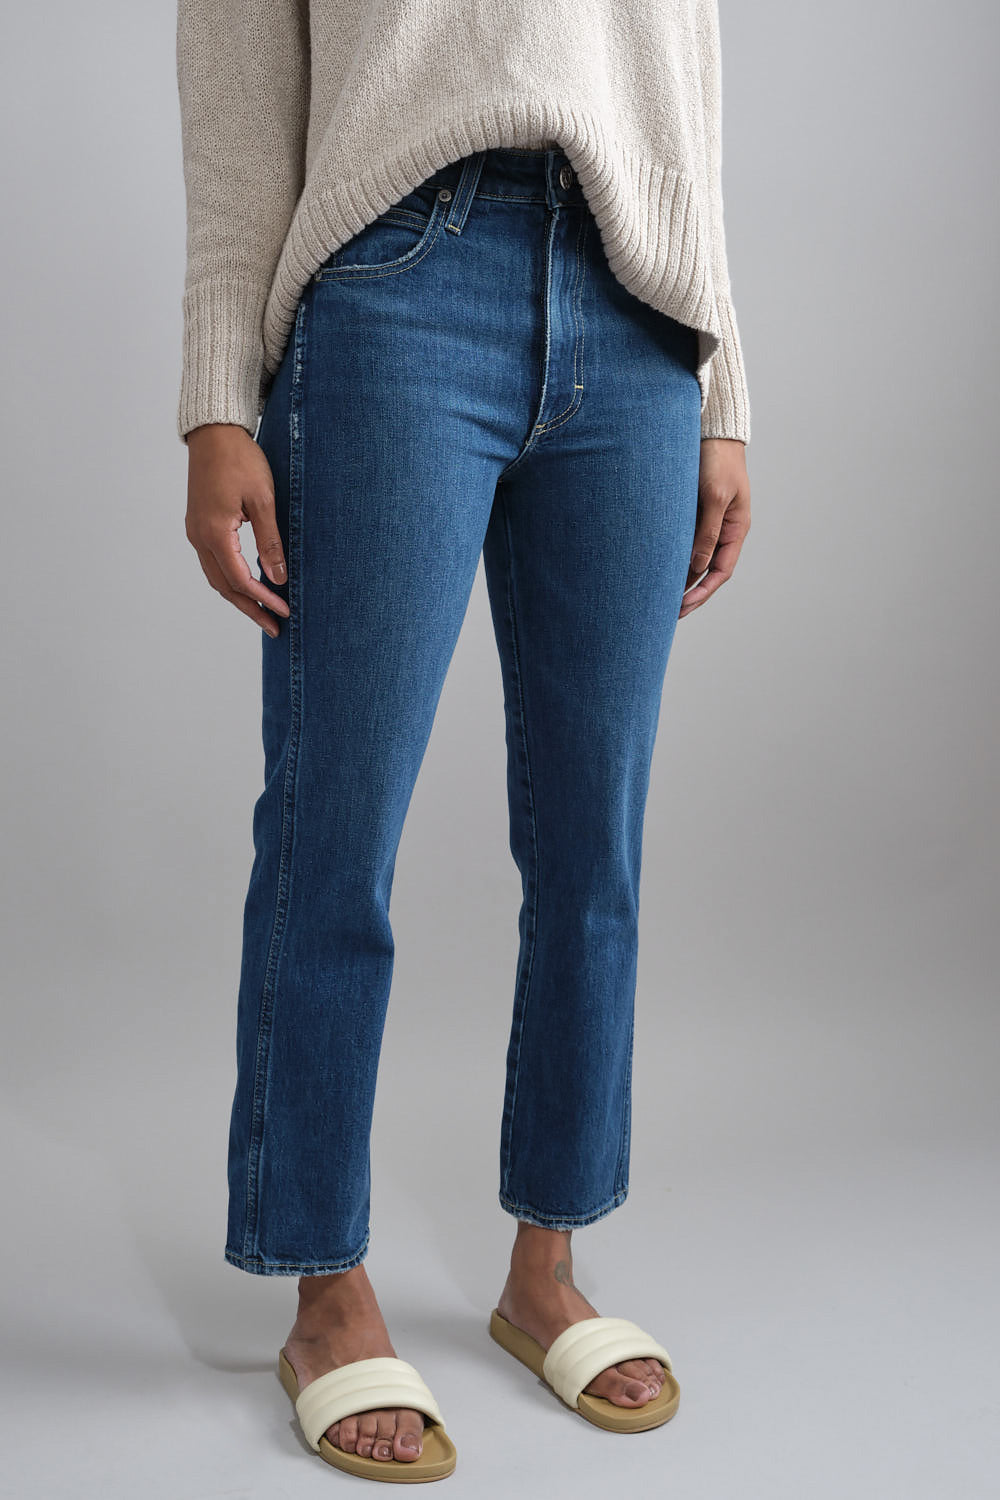 Front of Chloe Crop Pant in Affection